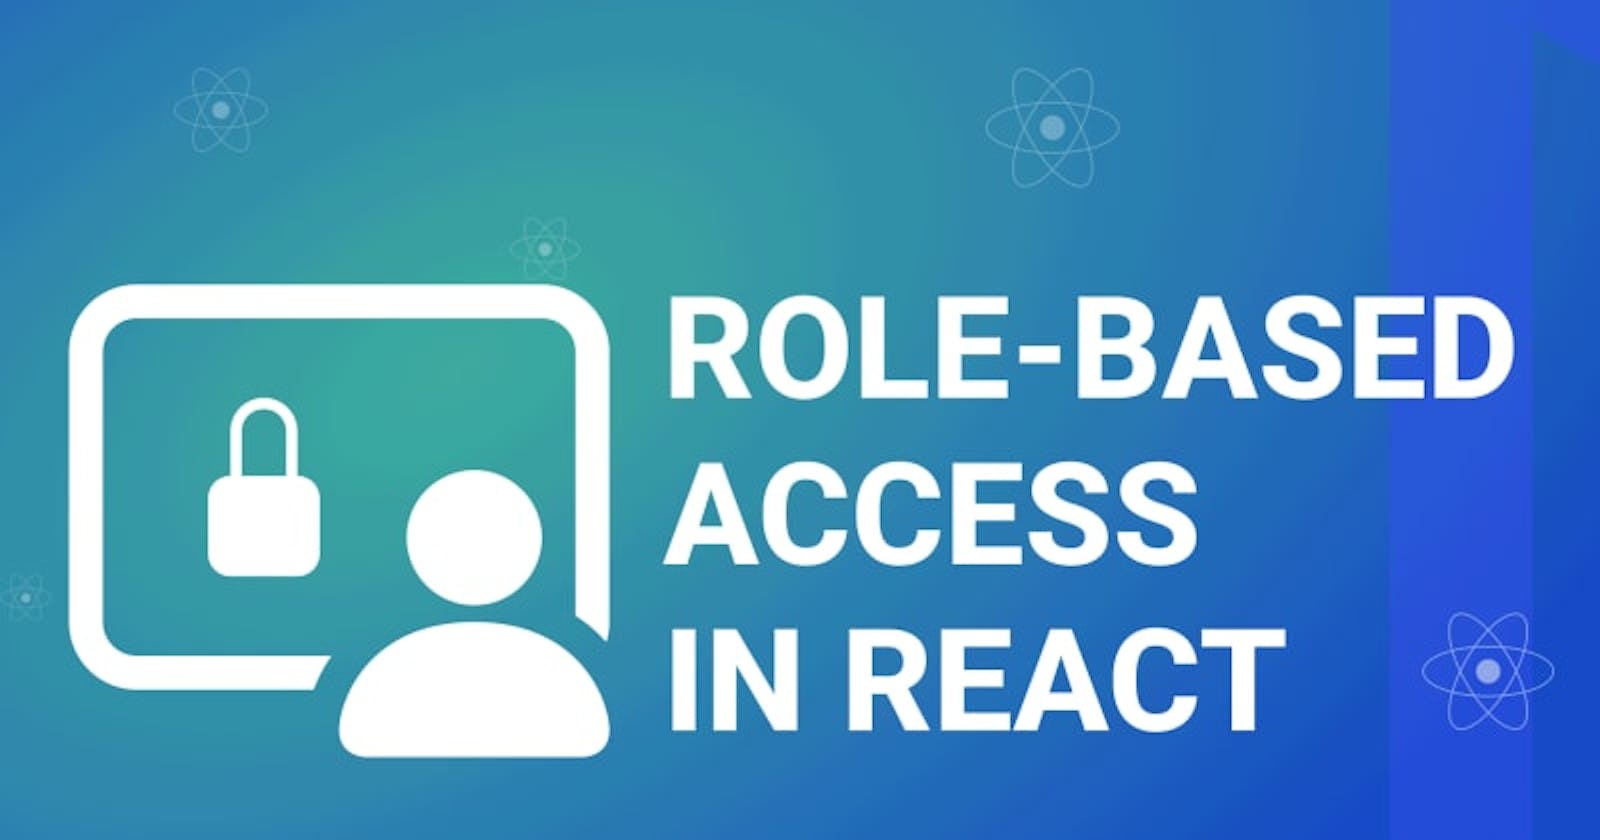 Role-based access in React